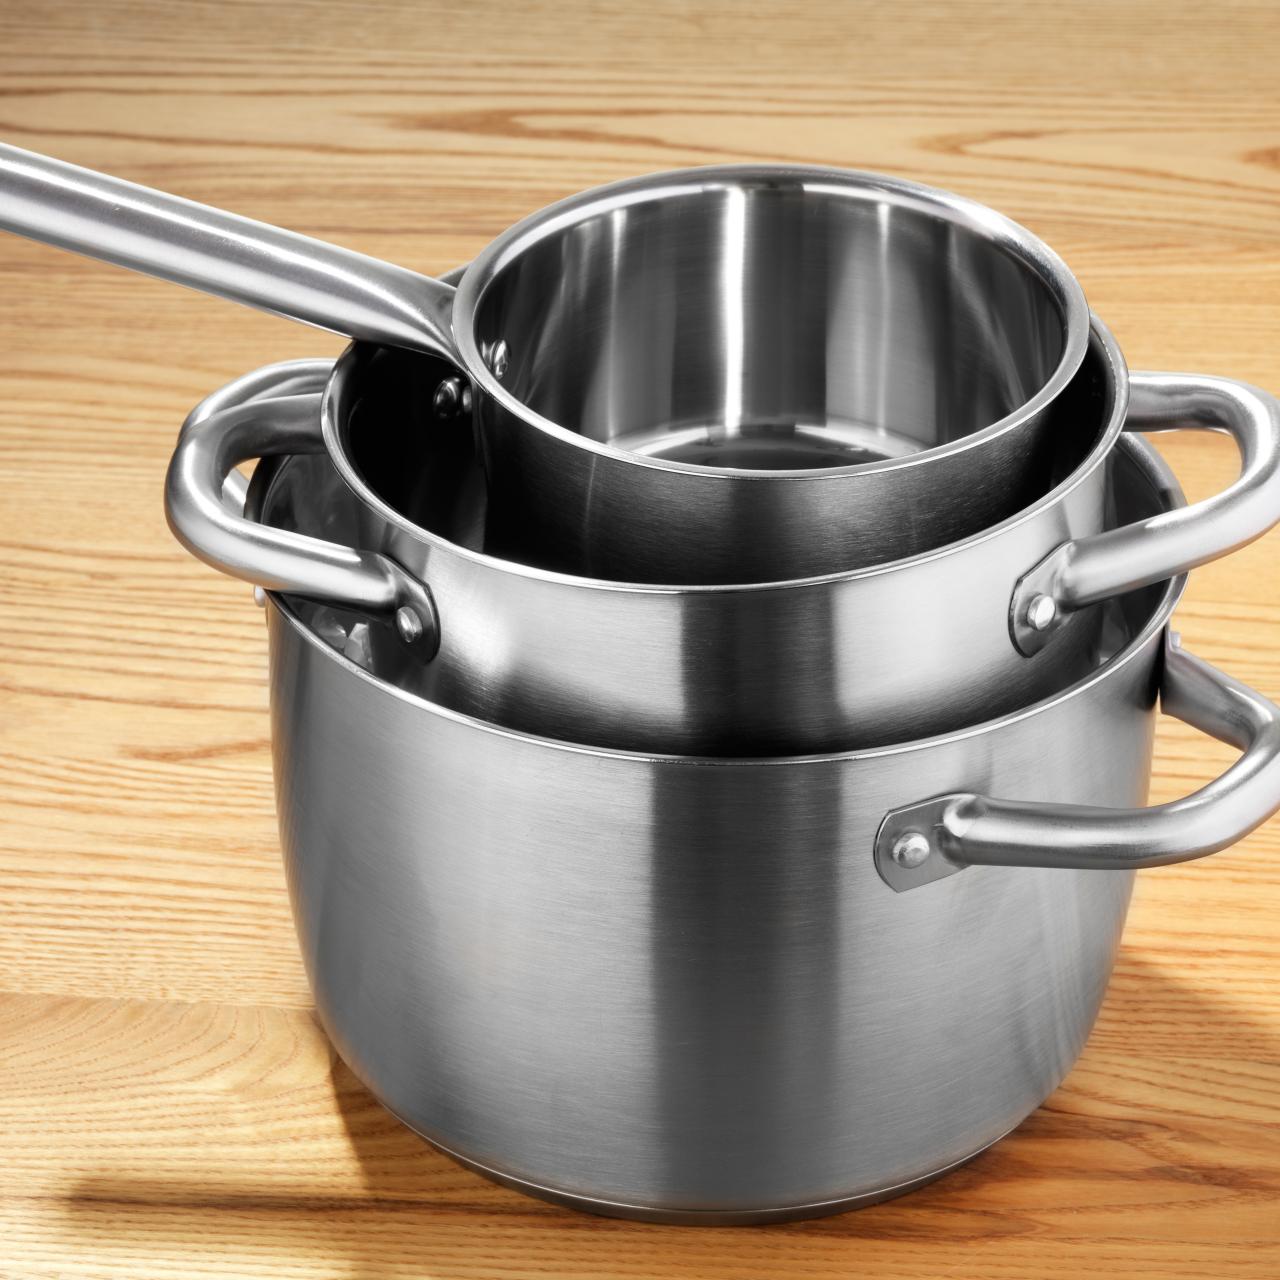 6 Essential Pots and Pans for Your Kitchen, Help Around the Kitchen : Food  Network